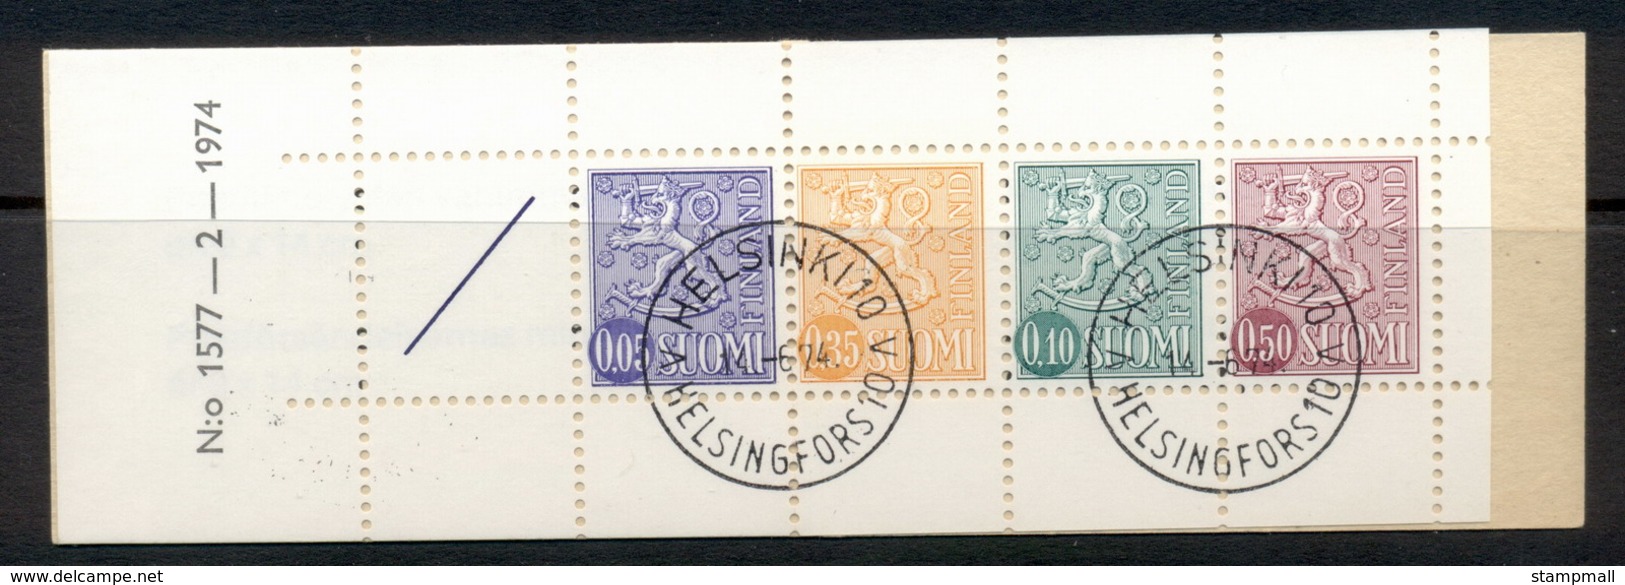 Finland 1968-78 Arms Of Finland Booklet 1x05,1x35,1x10,1x50, 1 Label Green Cover CTO - Booklets